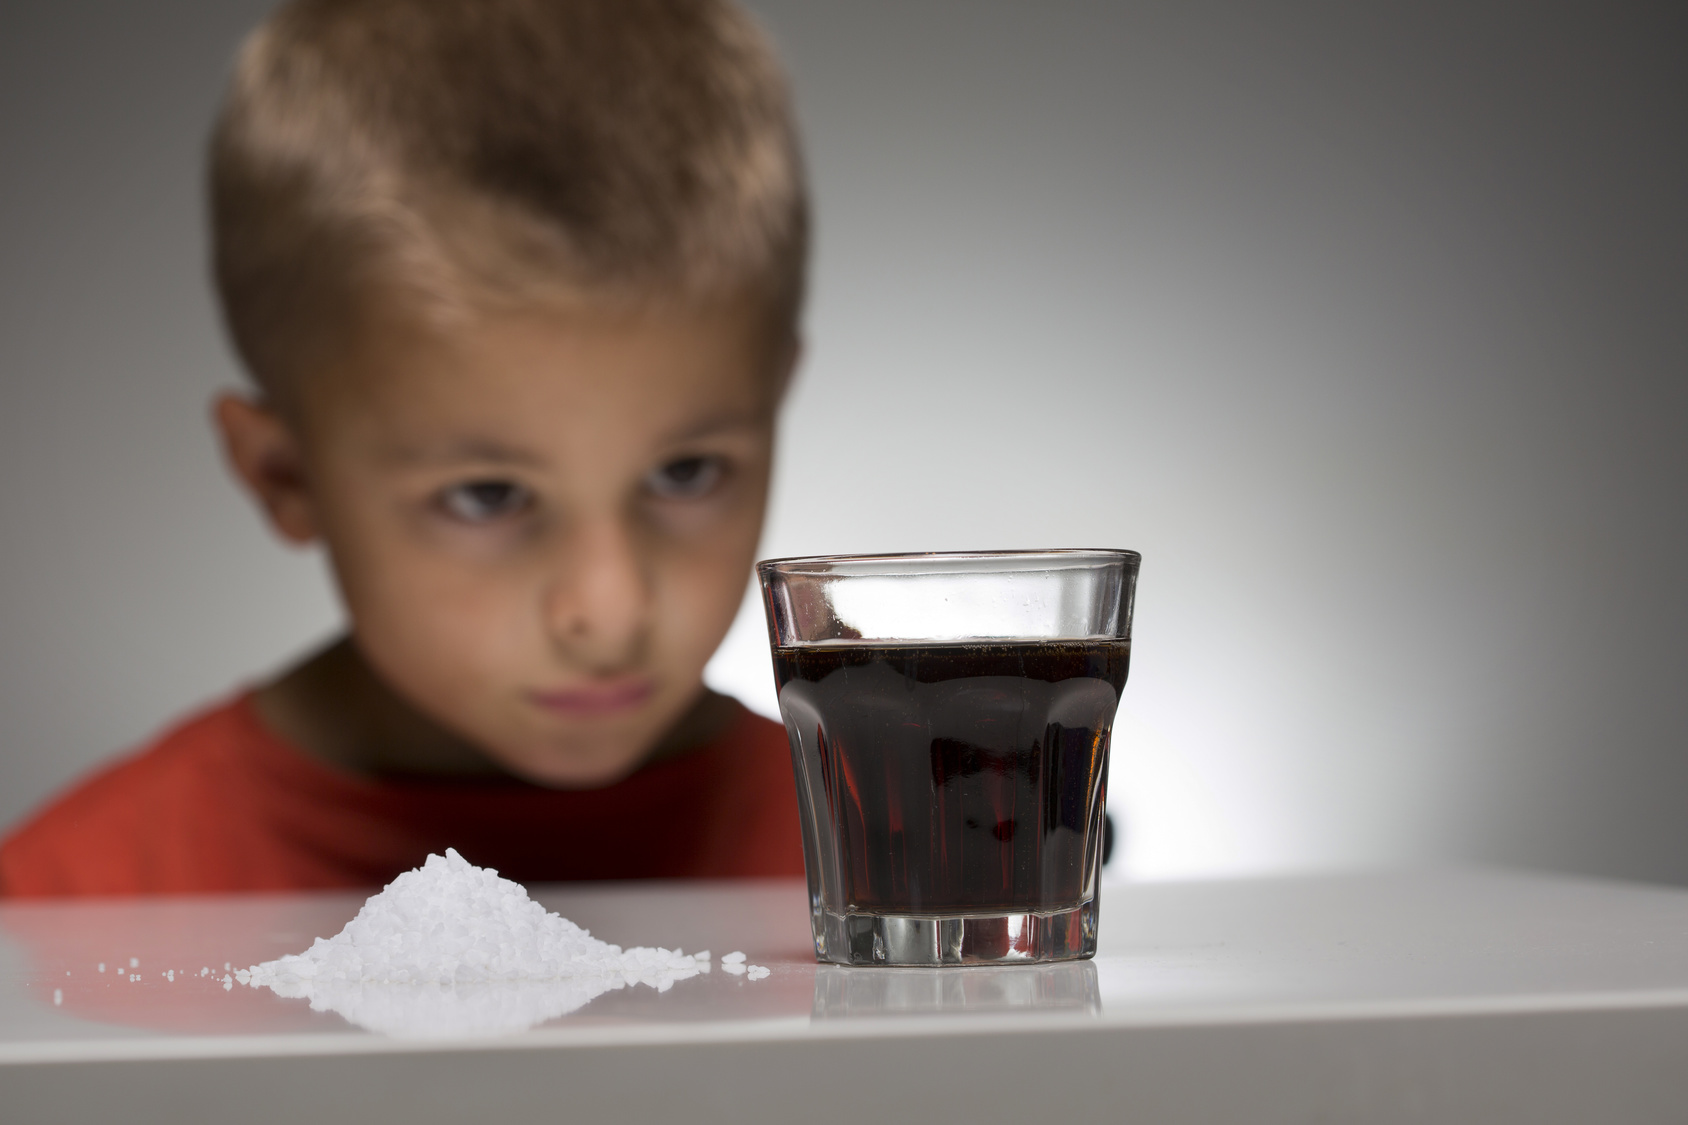 Concept photo of a child in front of a soft drink with sugar. The over-consumption of sugar-sweetened soft drinks is associated with obesity, type 2 diabetes, dental caries, and low nutrient levels.